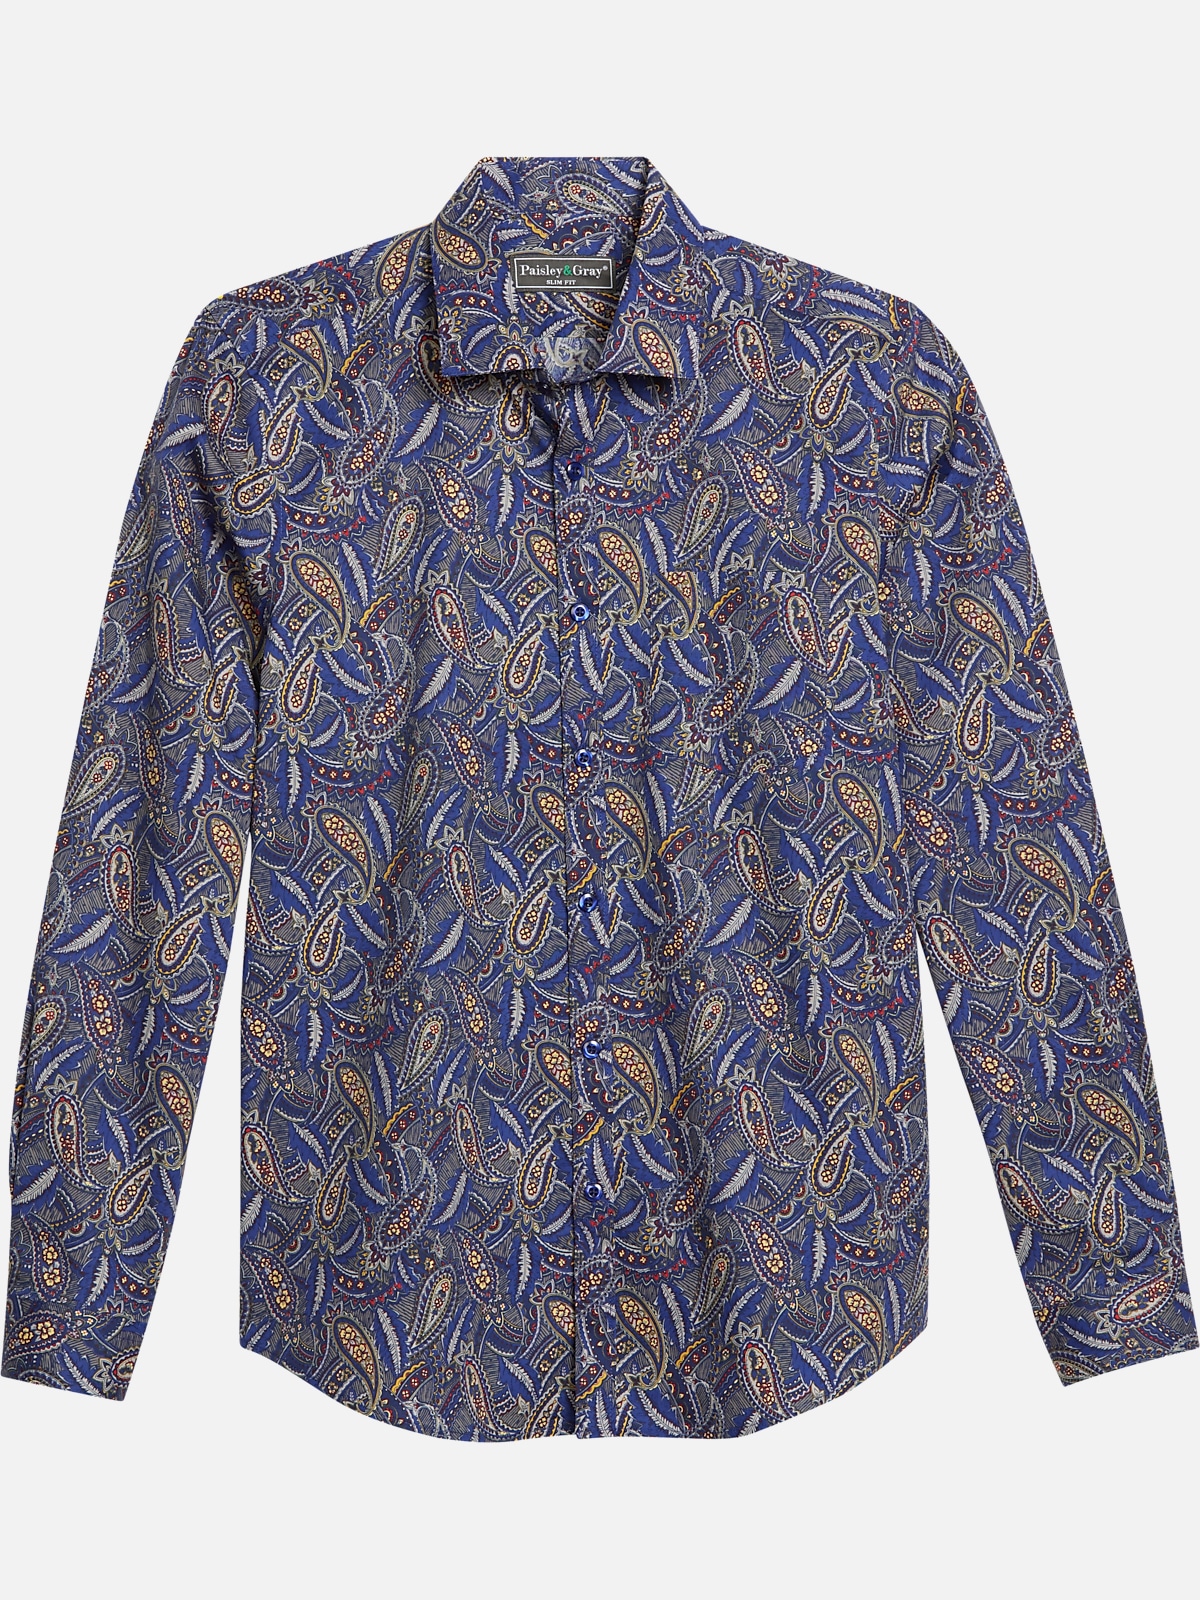 https://image.menswearhouse.com/is/image/TMW/TMW_6PAP_14_PAISLEY_GRAY_SPORT_SHIRTS_BLUE_MAIN?imPolicy=pdp-zoom-mob